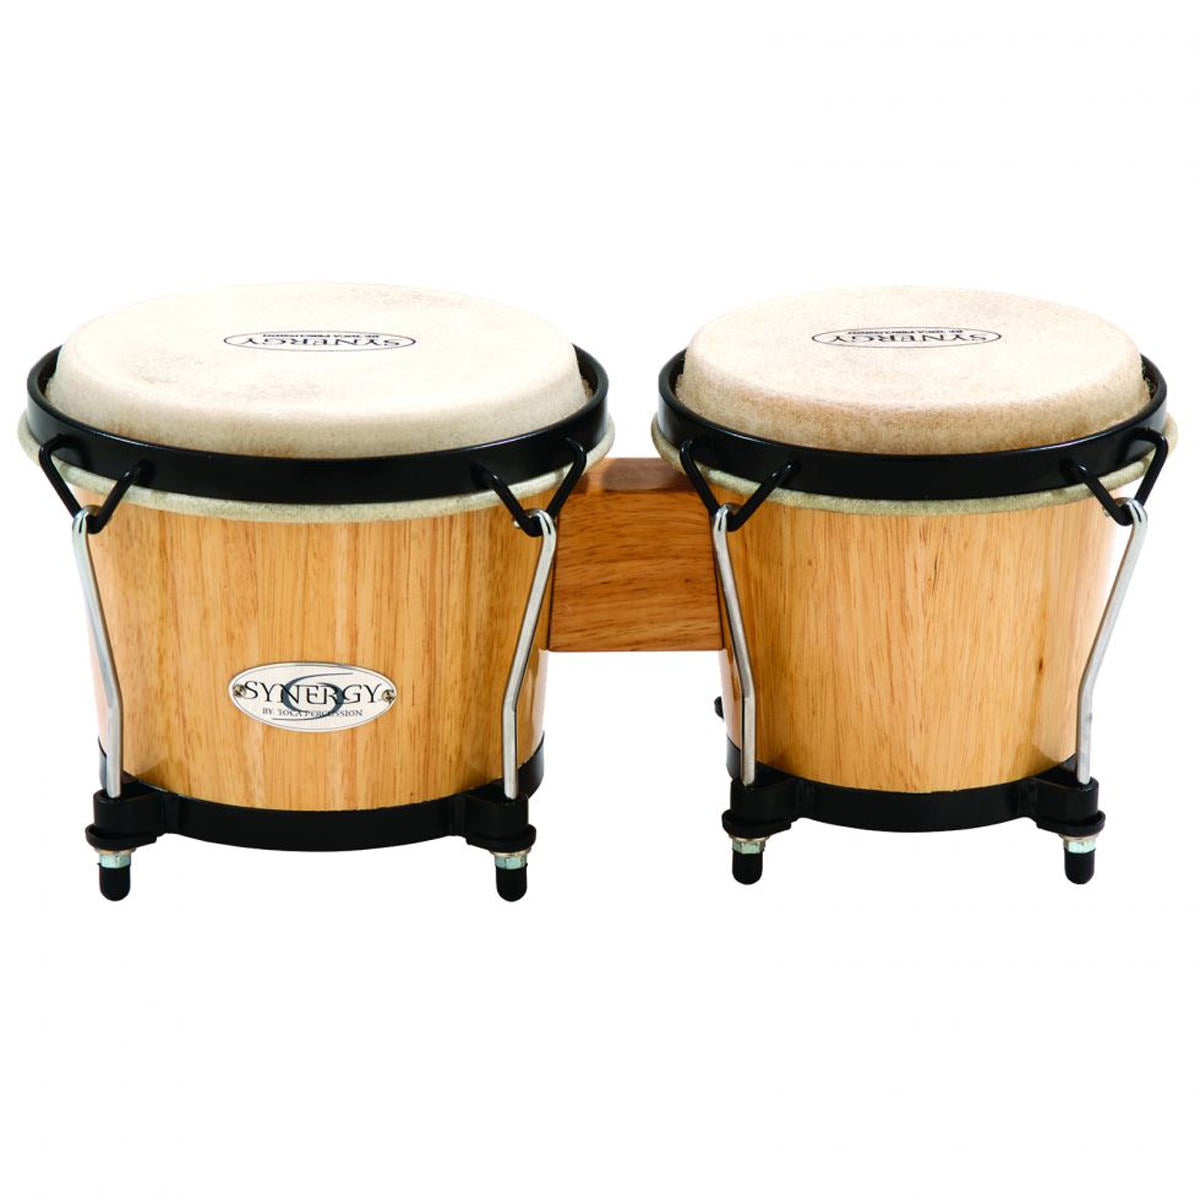 Toca Synergy Wood Bongos in Natural